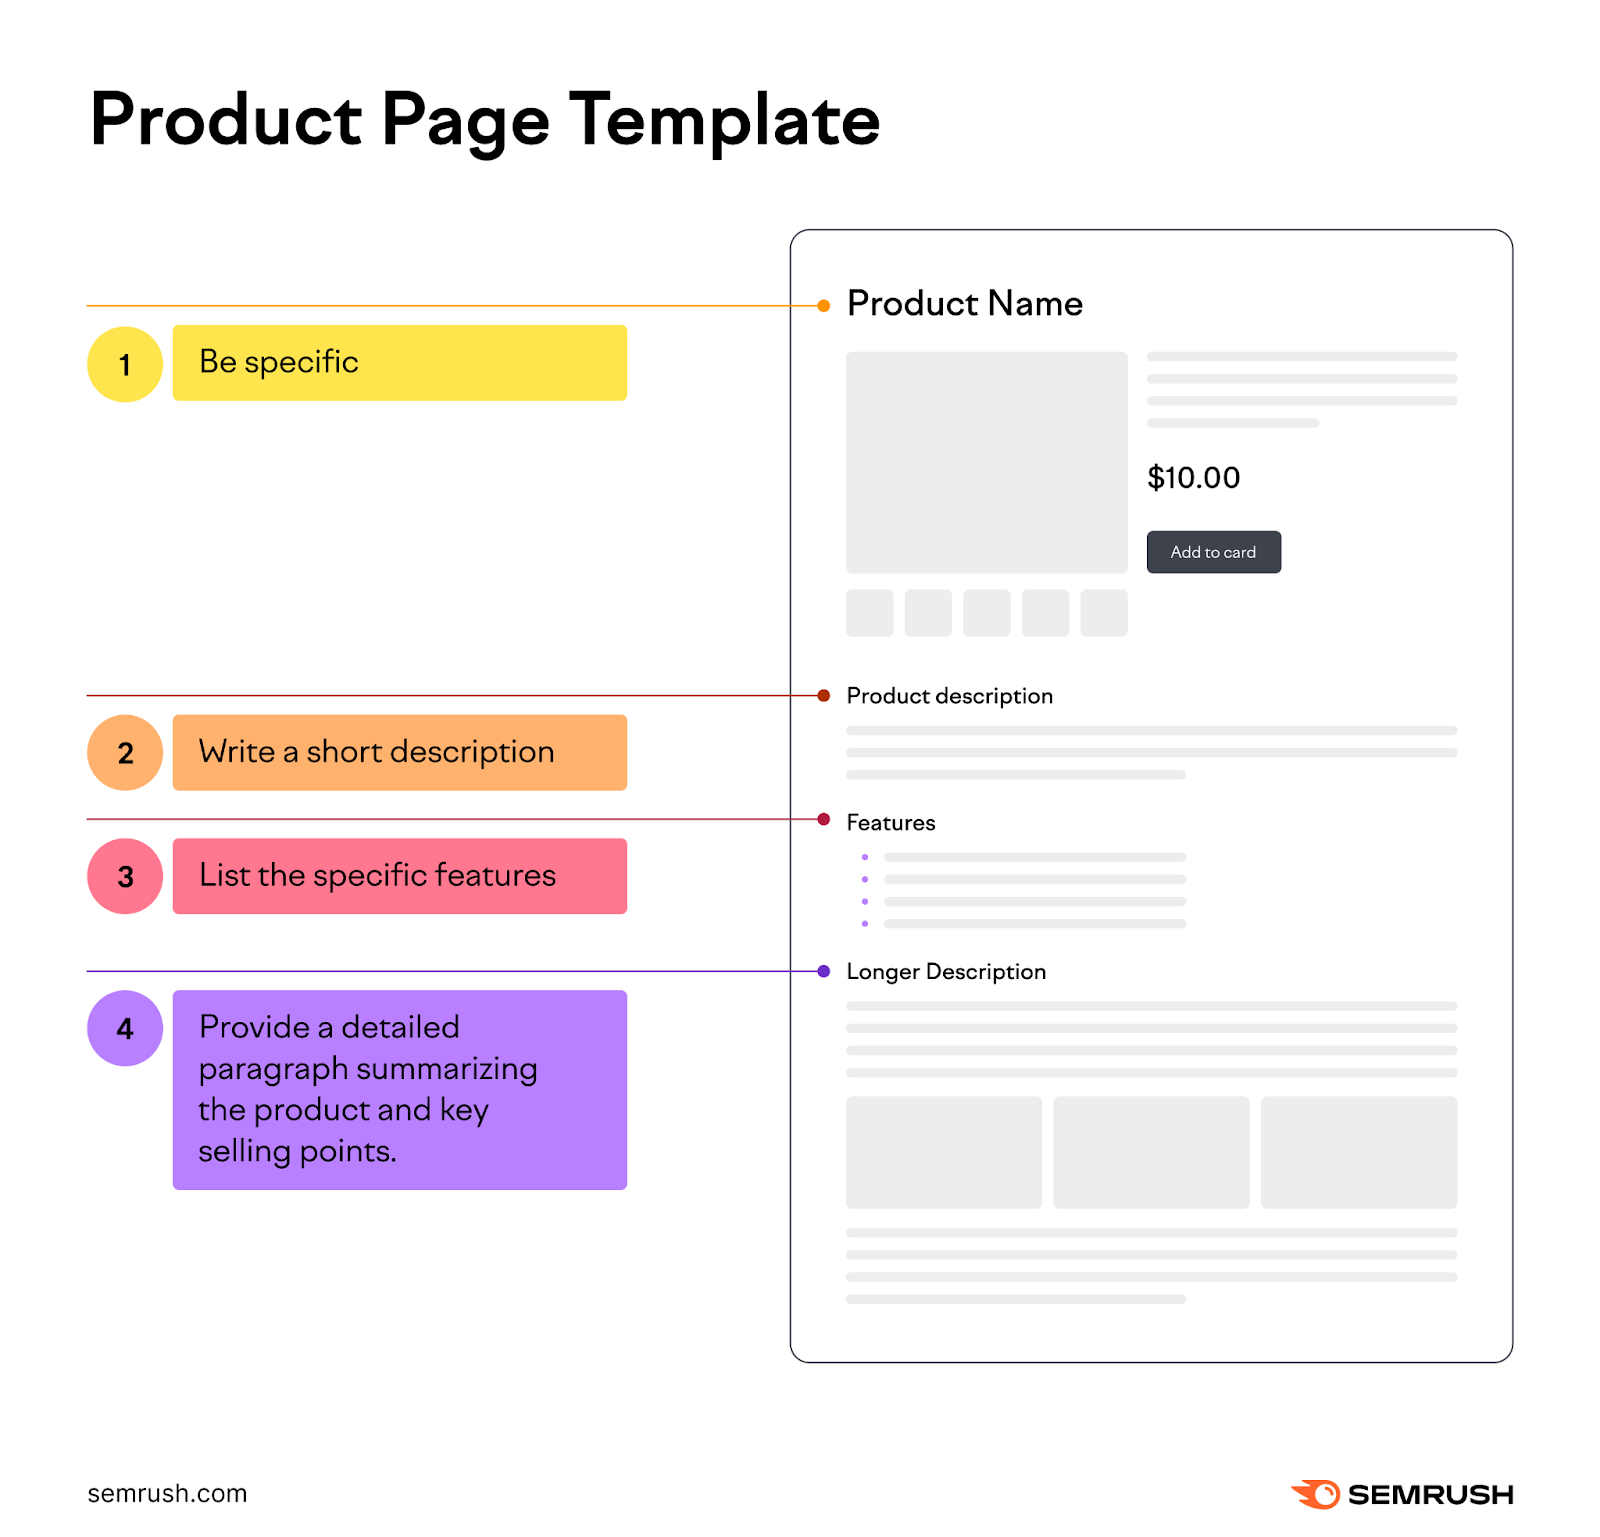 An infographic showing a product page template